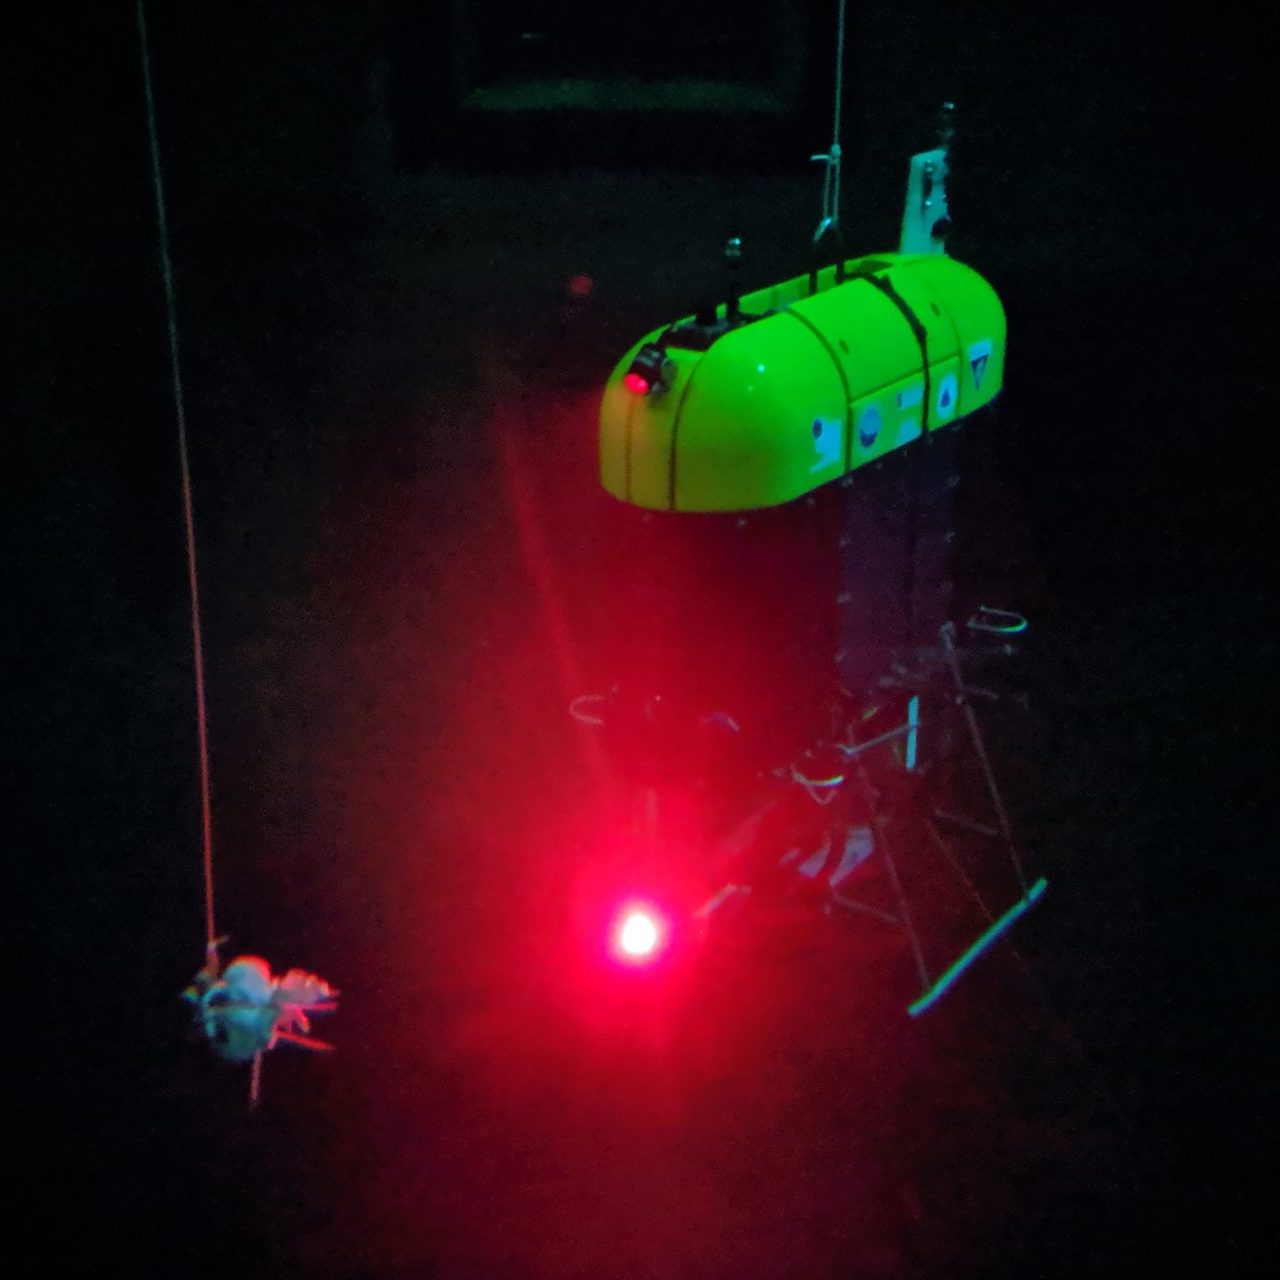 Mesobot using red light in a test tank